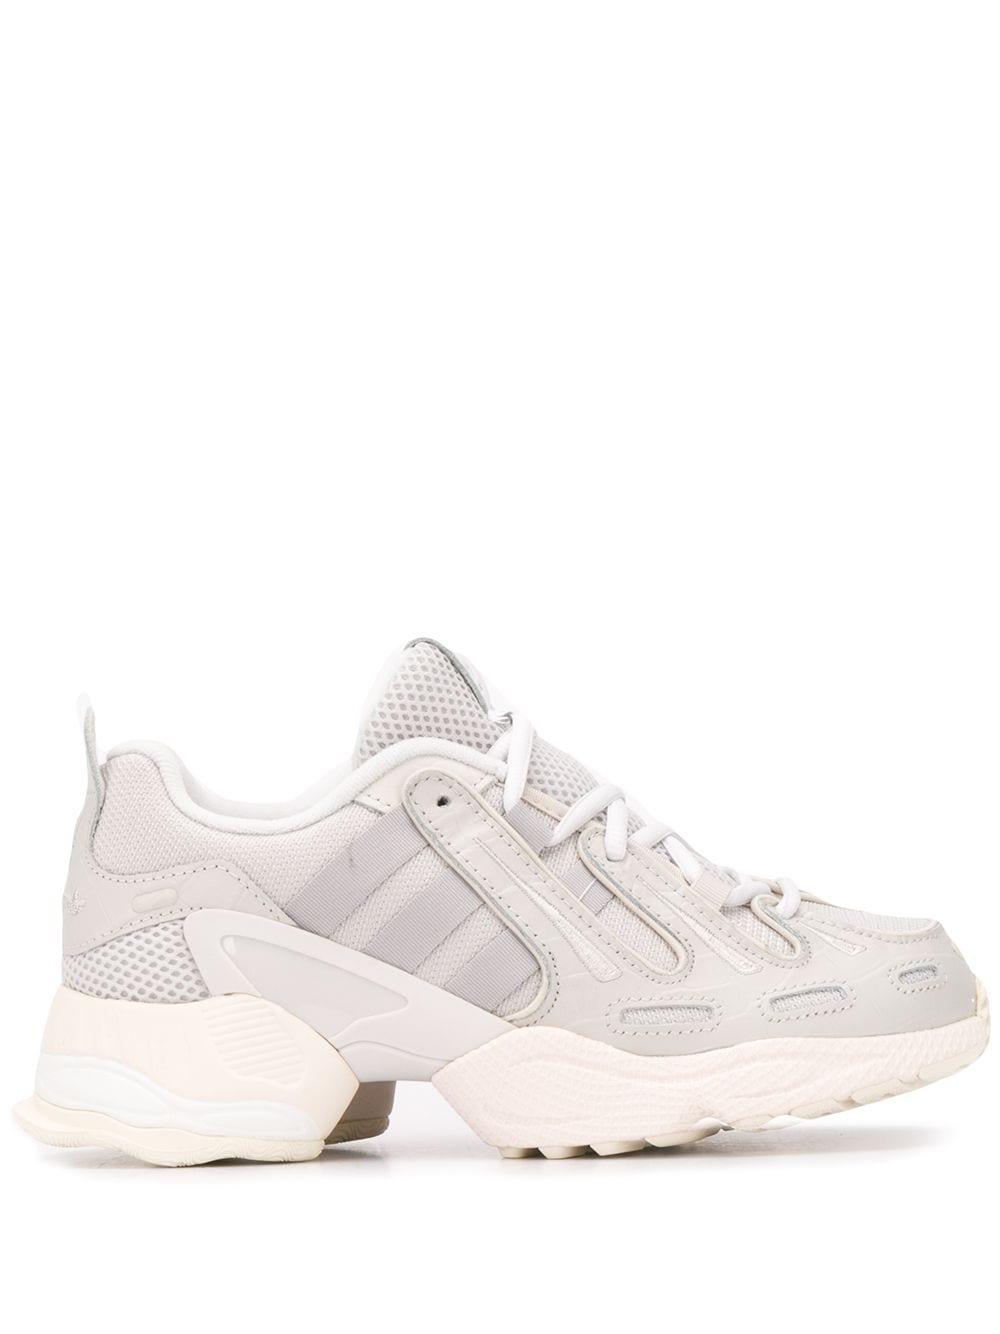 adidas Leather Equipment Chunky Sneakers in Grey (Gray) | Lyst صور عن العيد